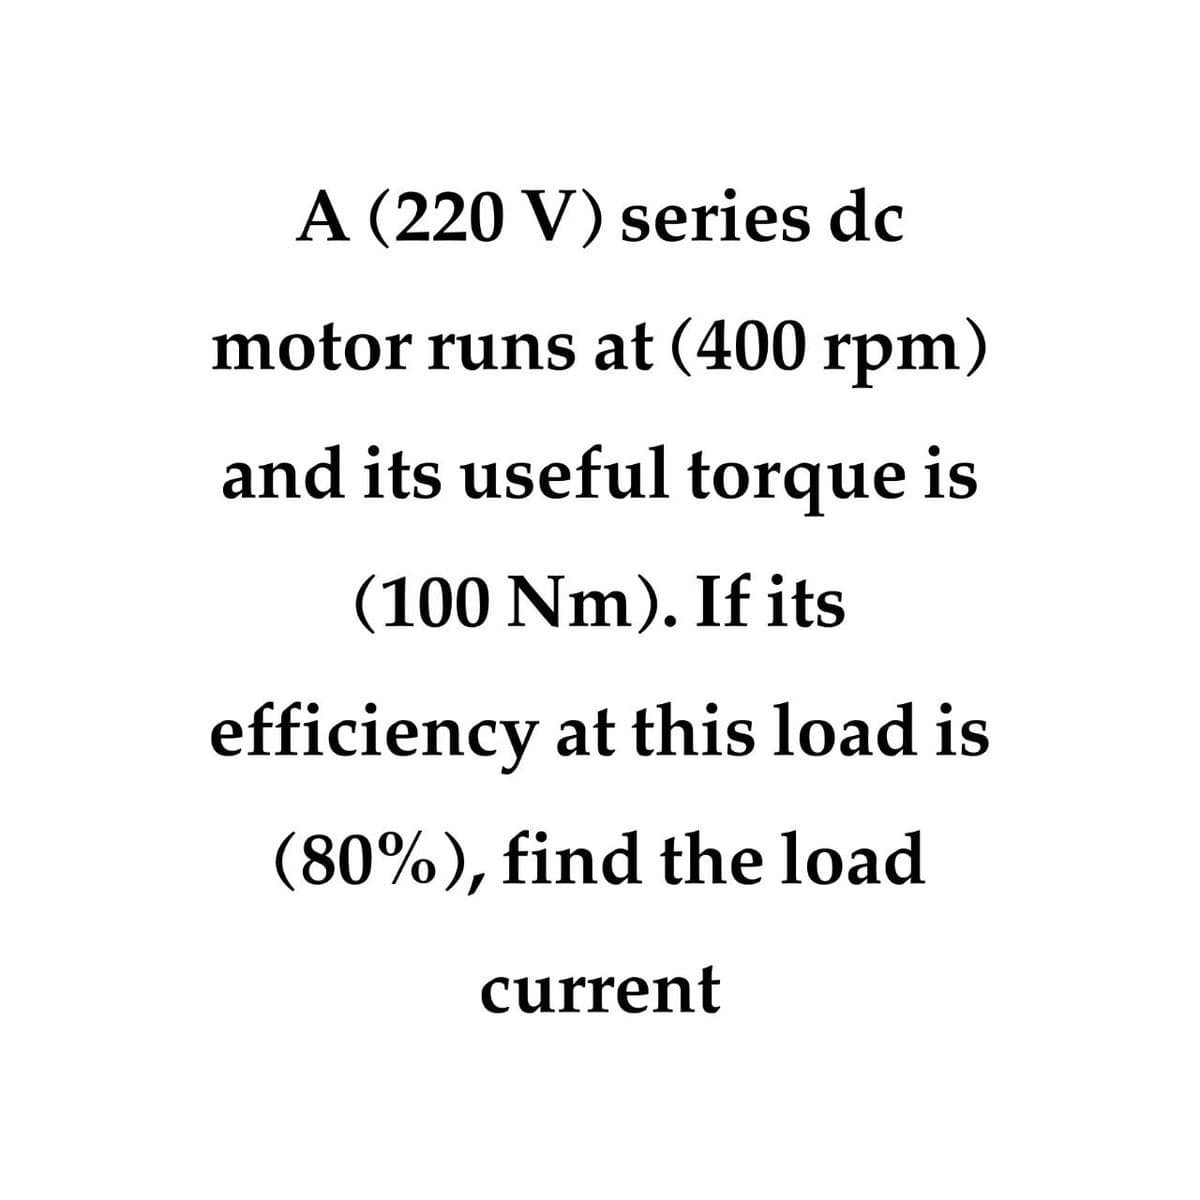 A (220 V) series dc
motor runs at (400 rpm)
and its useful torque is
(100 Nm). If its
efficiency at this load is
(80%), find the load
current
